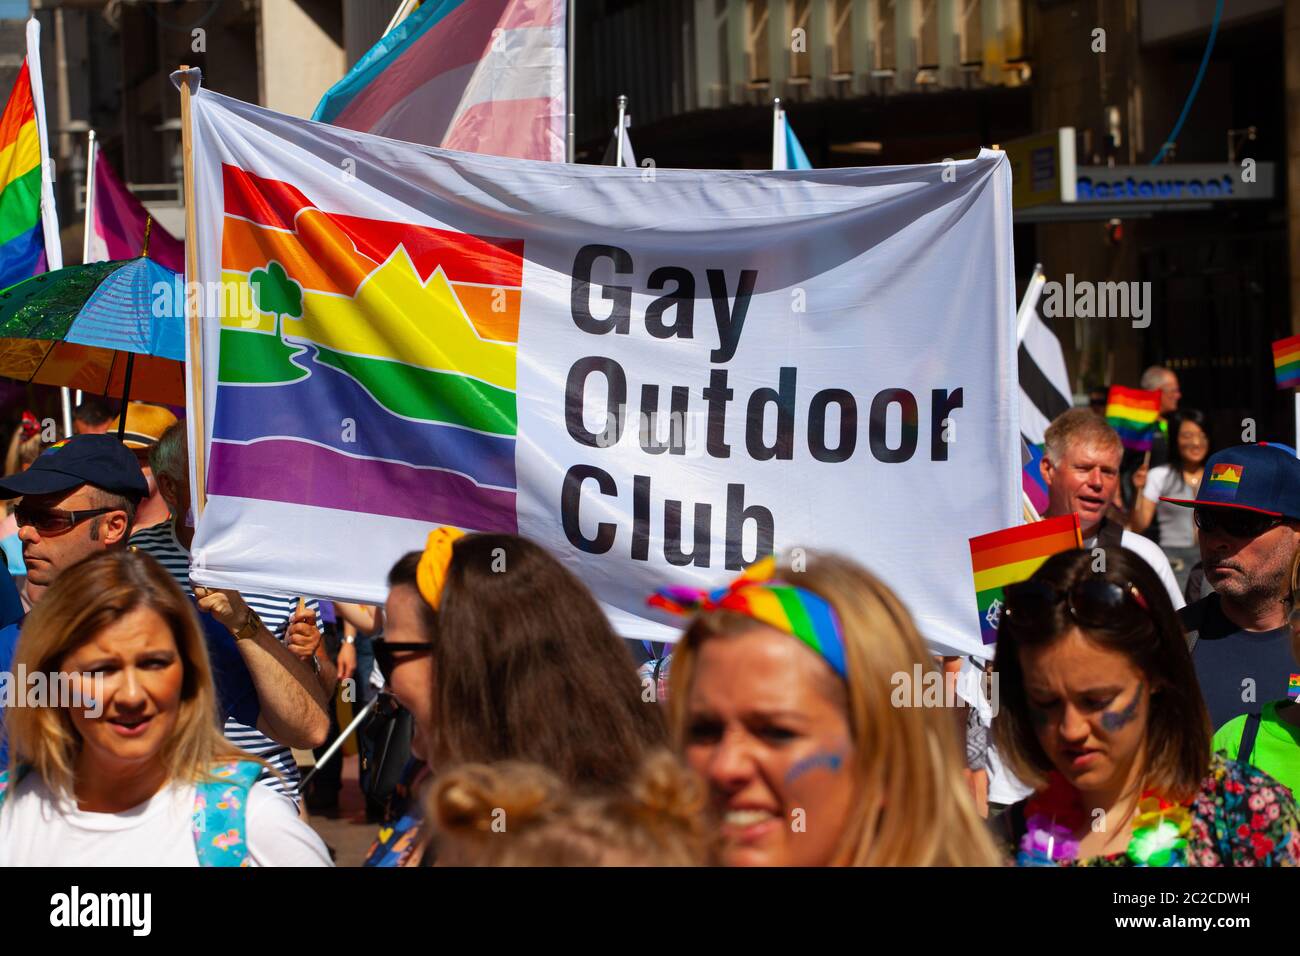 Banner for the Gay Outdoor Club at Pride Cymru, Pride Wales, Cardiff 2019 Stock Photo